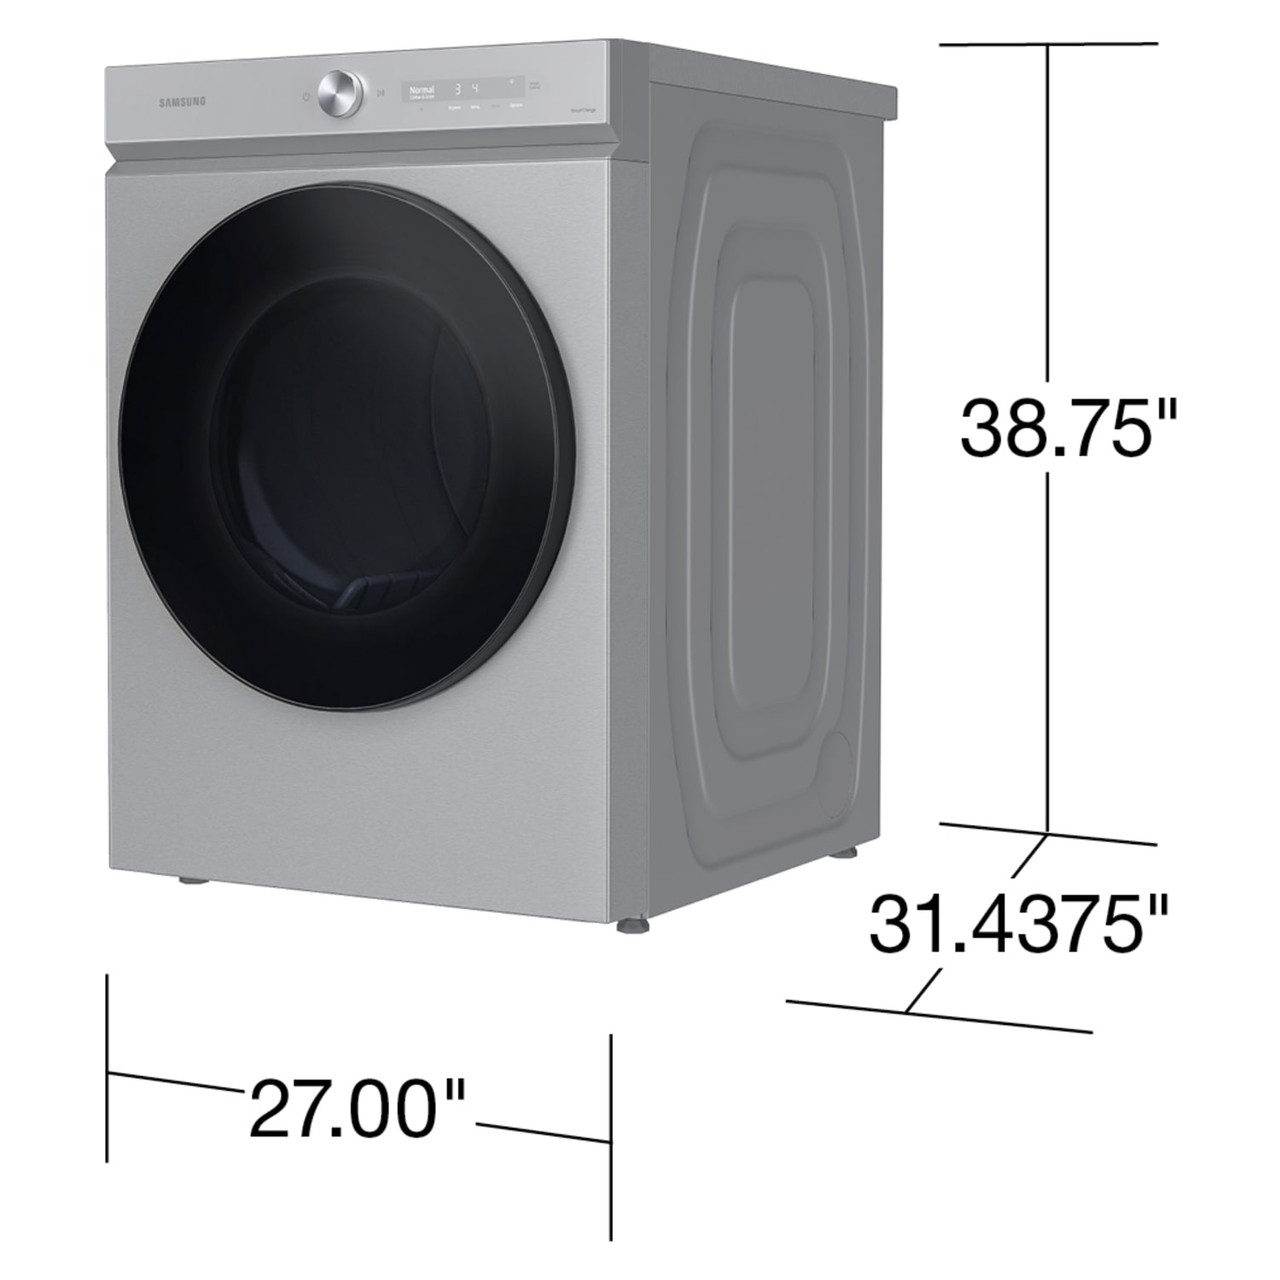 Samsung BESPOKE 7.6 cu. ft. Ultra Capacity Electric Dryer with Super Speed Dry and AI Powered Smart Dial in Silver Steel